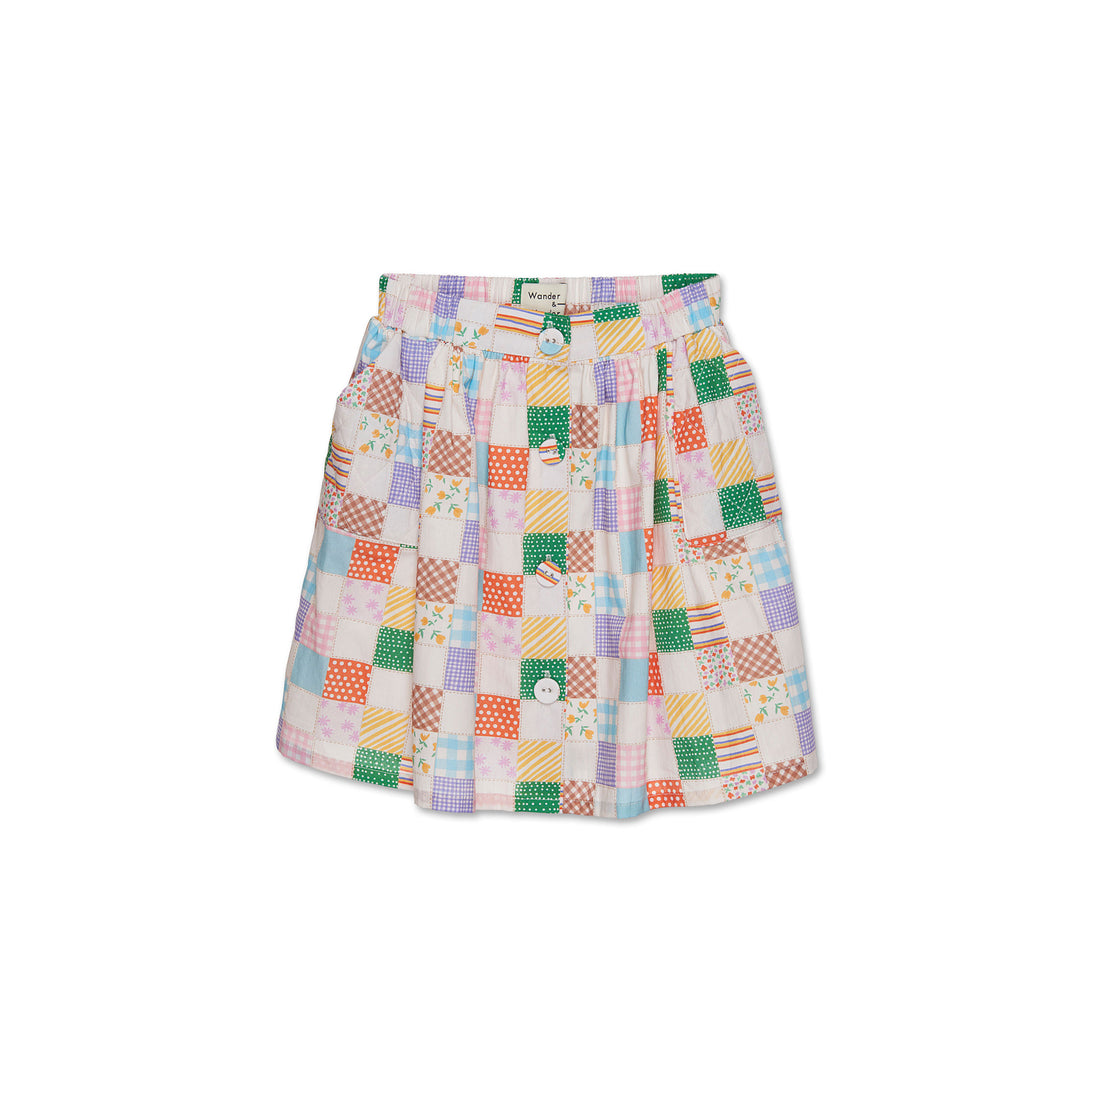 Wander and Wonder  Multi Quilt Quilted Skirt